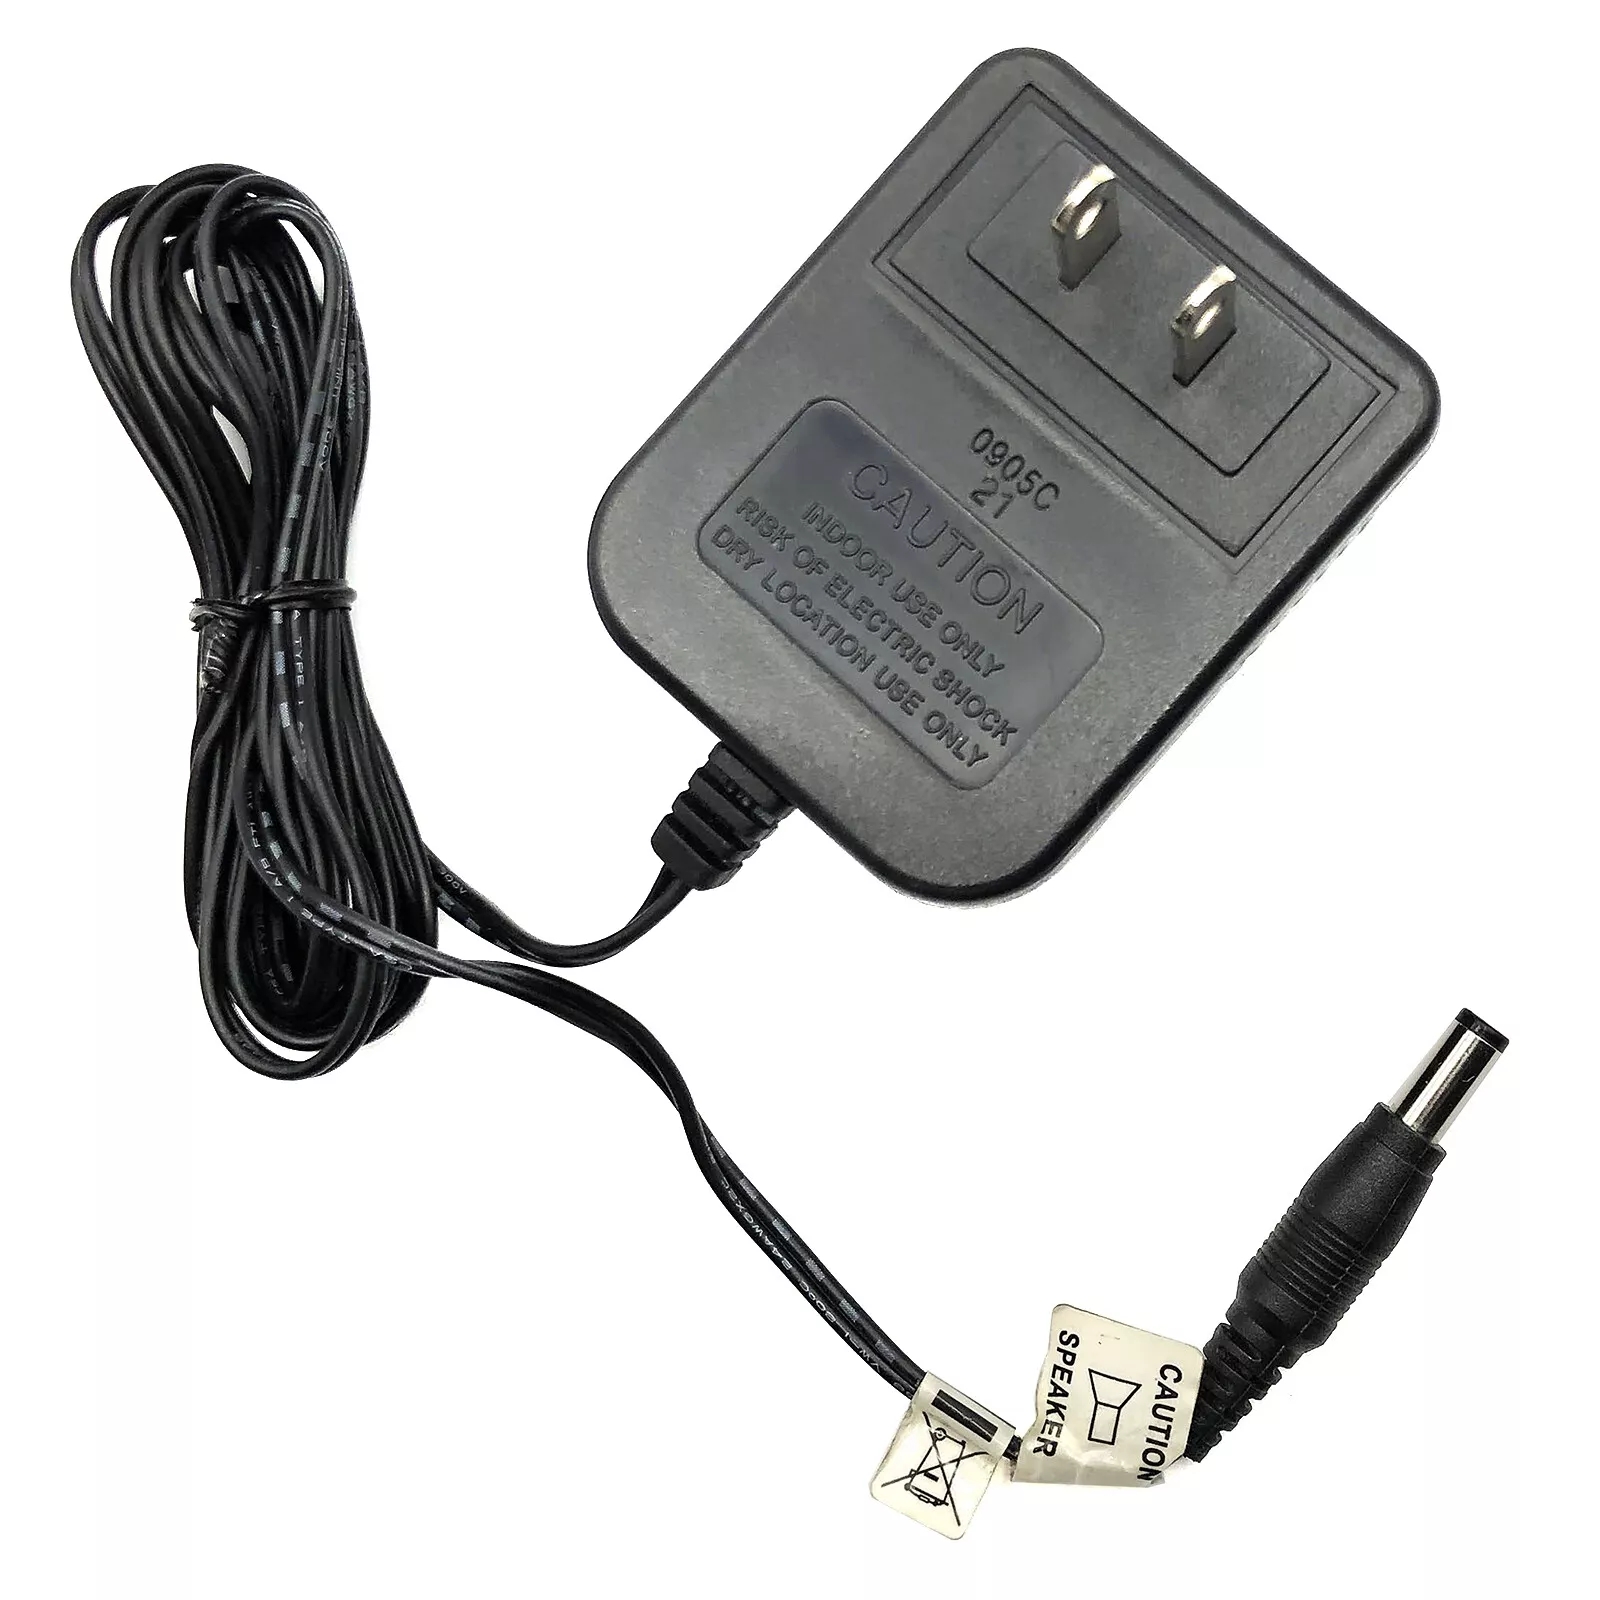 Genuine Hon-Kwang 12VDC 500mA AC Adapter D12-50 Transformer for Netgear WiFi DSL Modem Routers - Click Image to Close